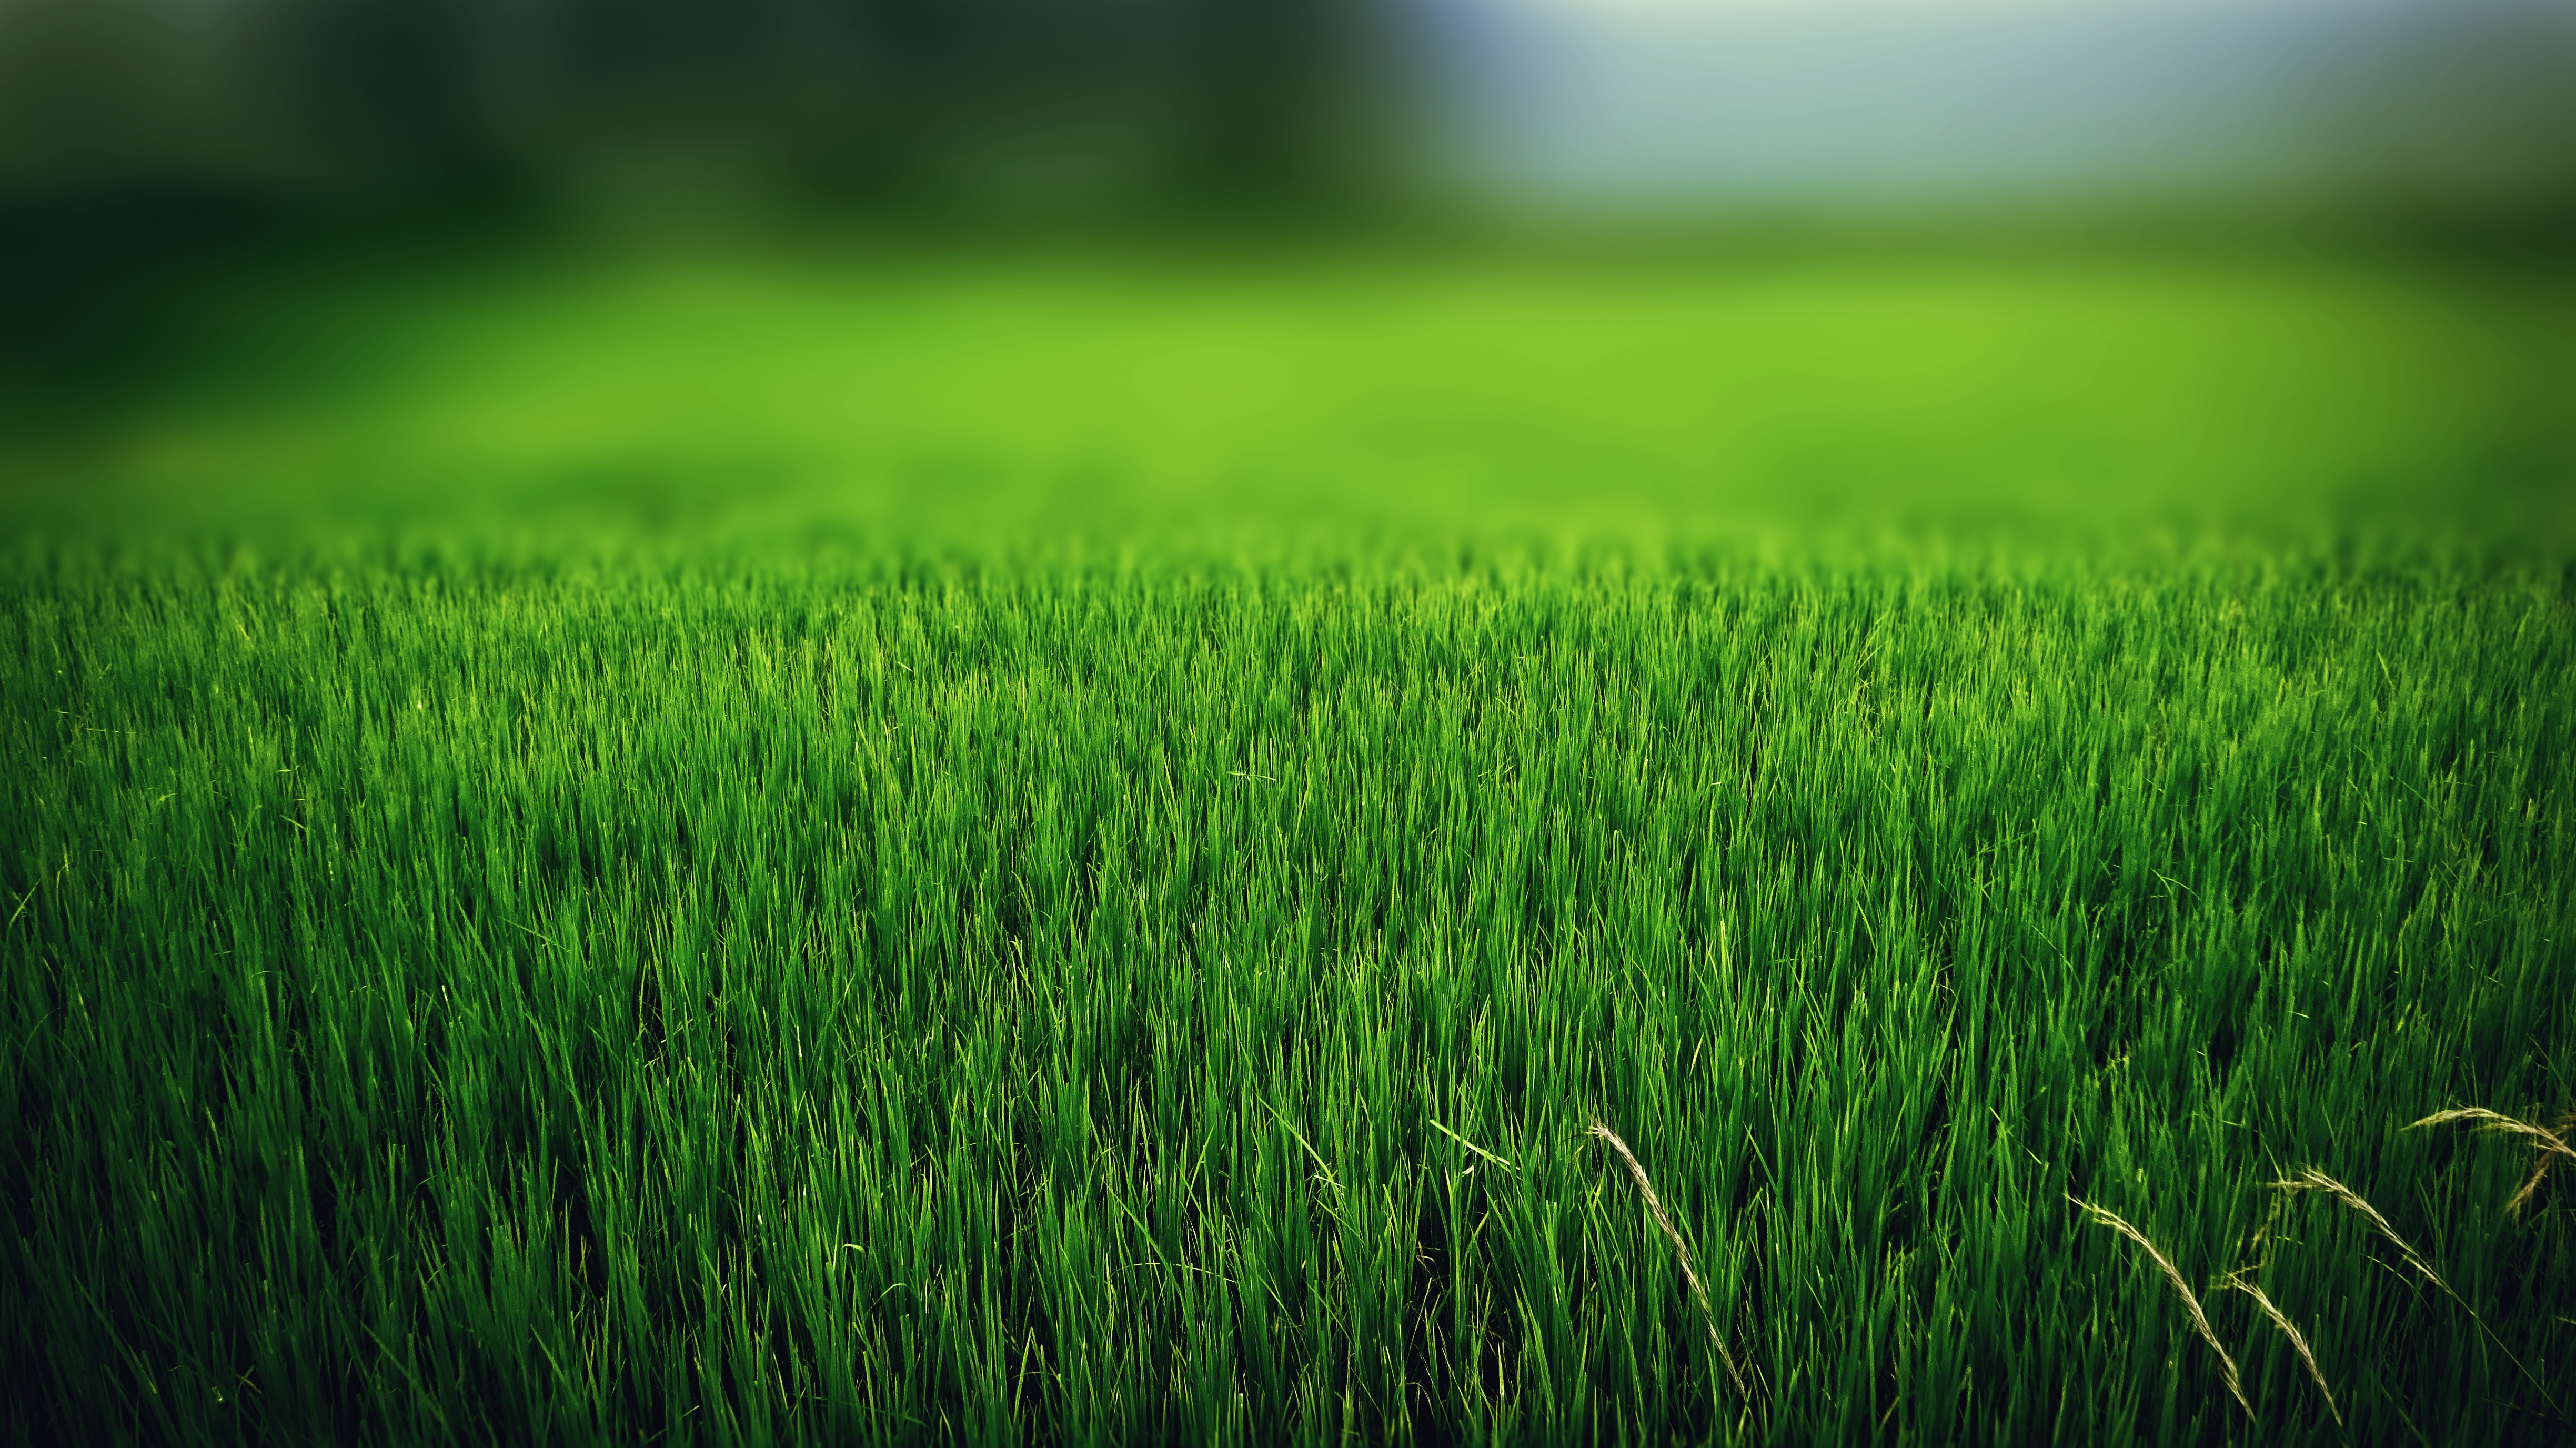 Landscape Photography of Green Grass Field · Free Stock Photo